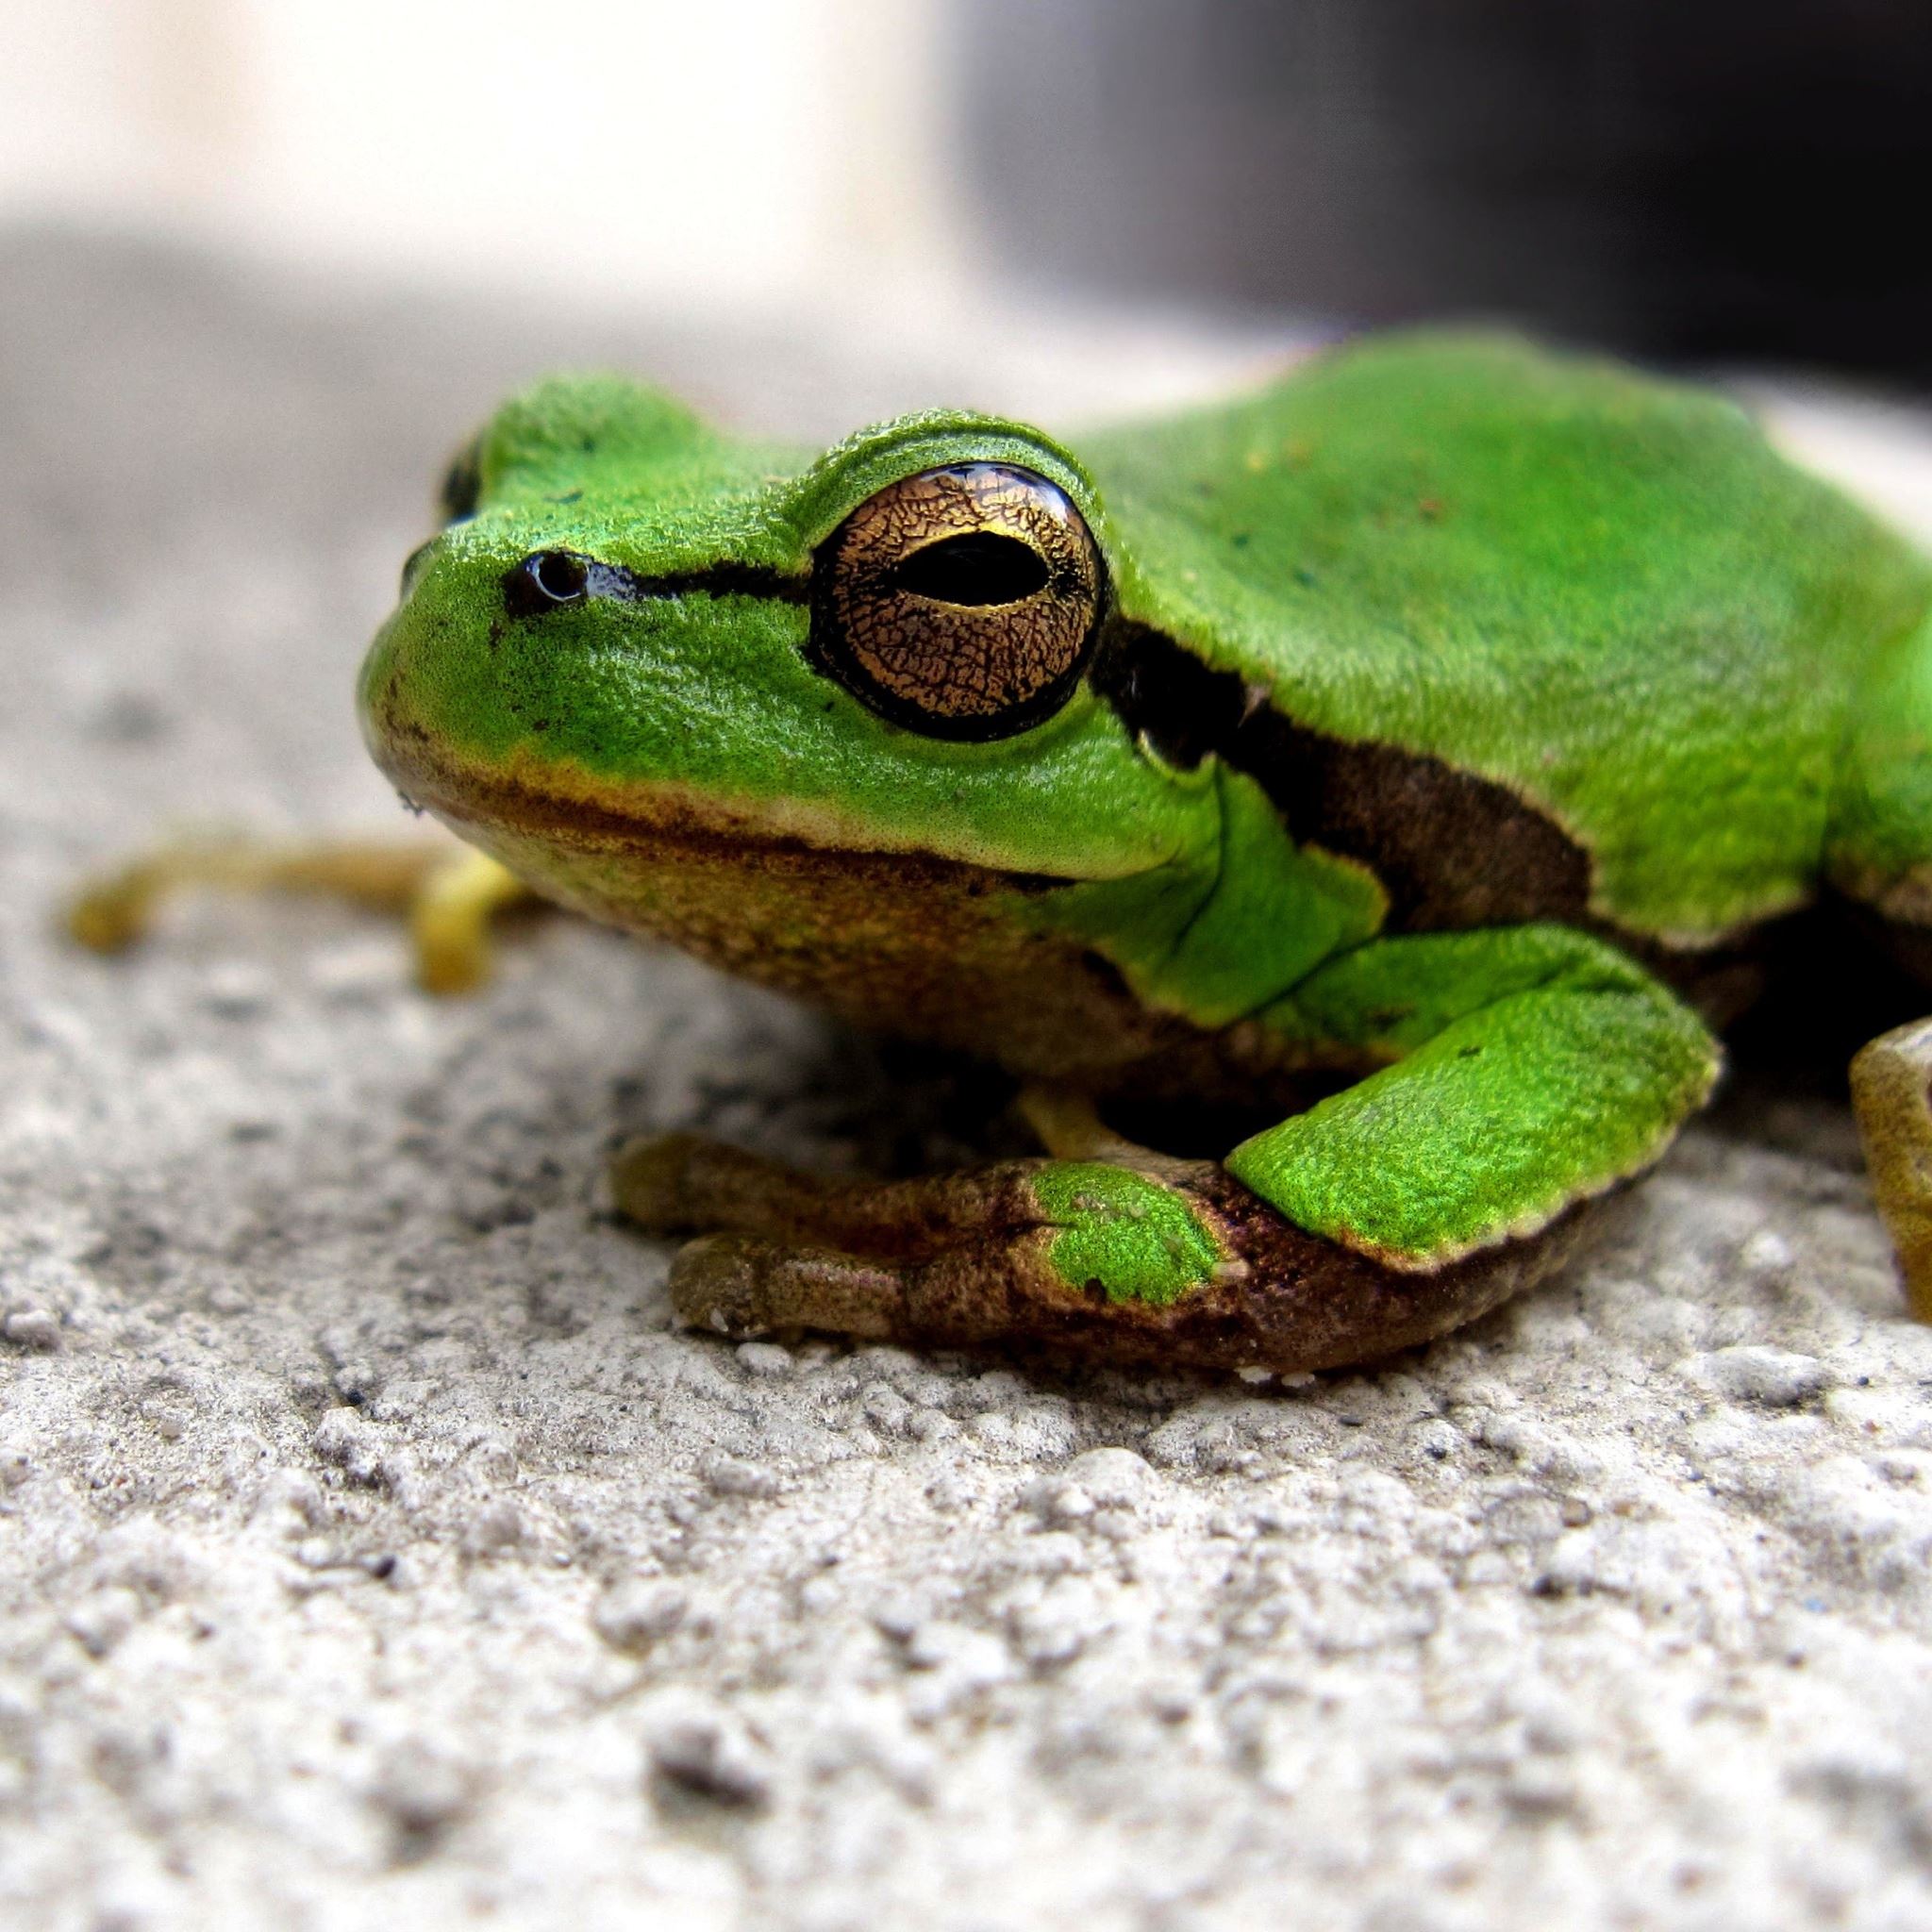 Frog On Ground iPad Air wallpaper 